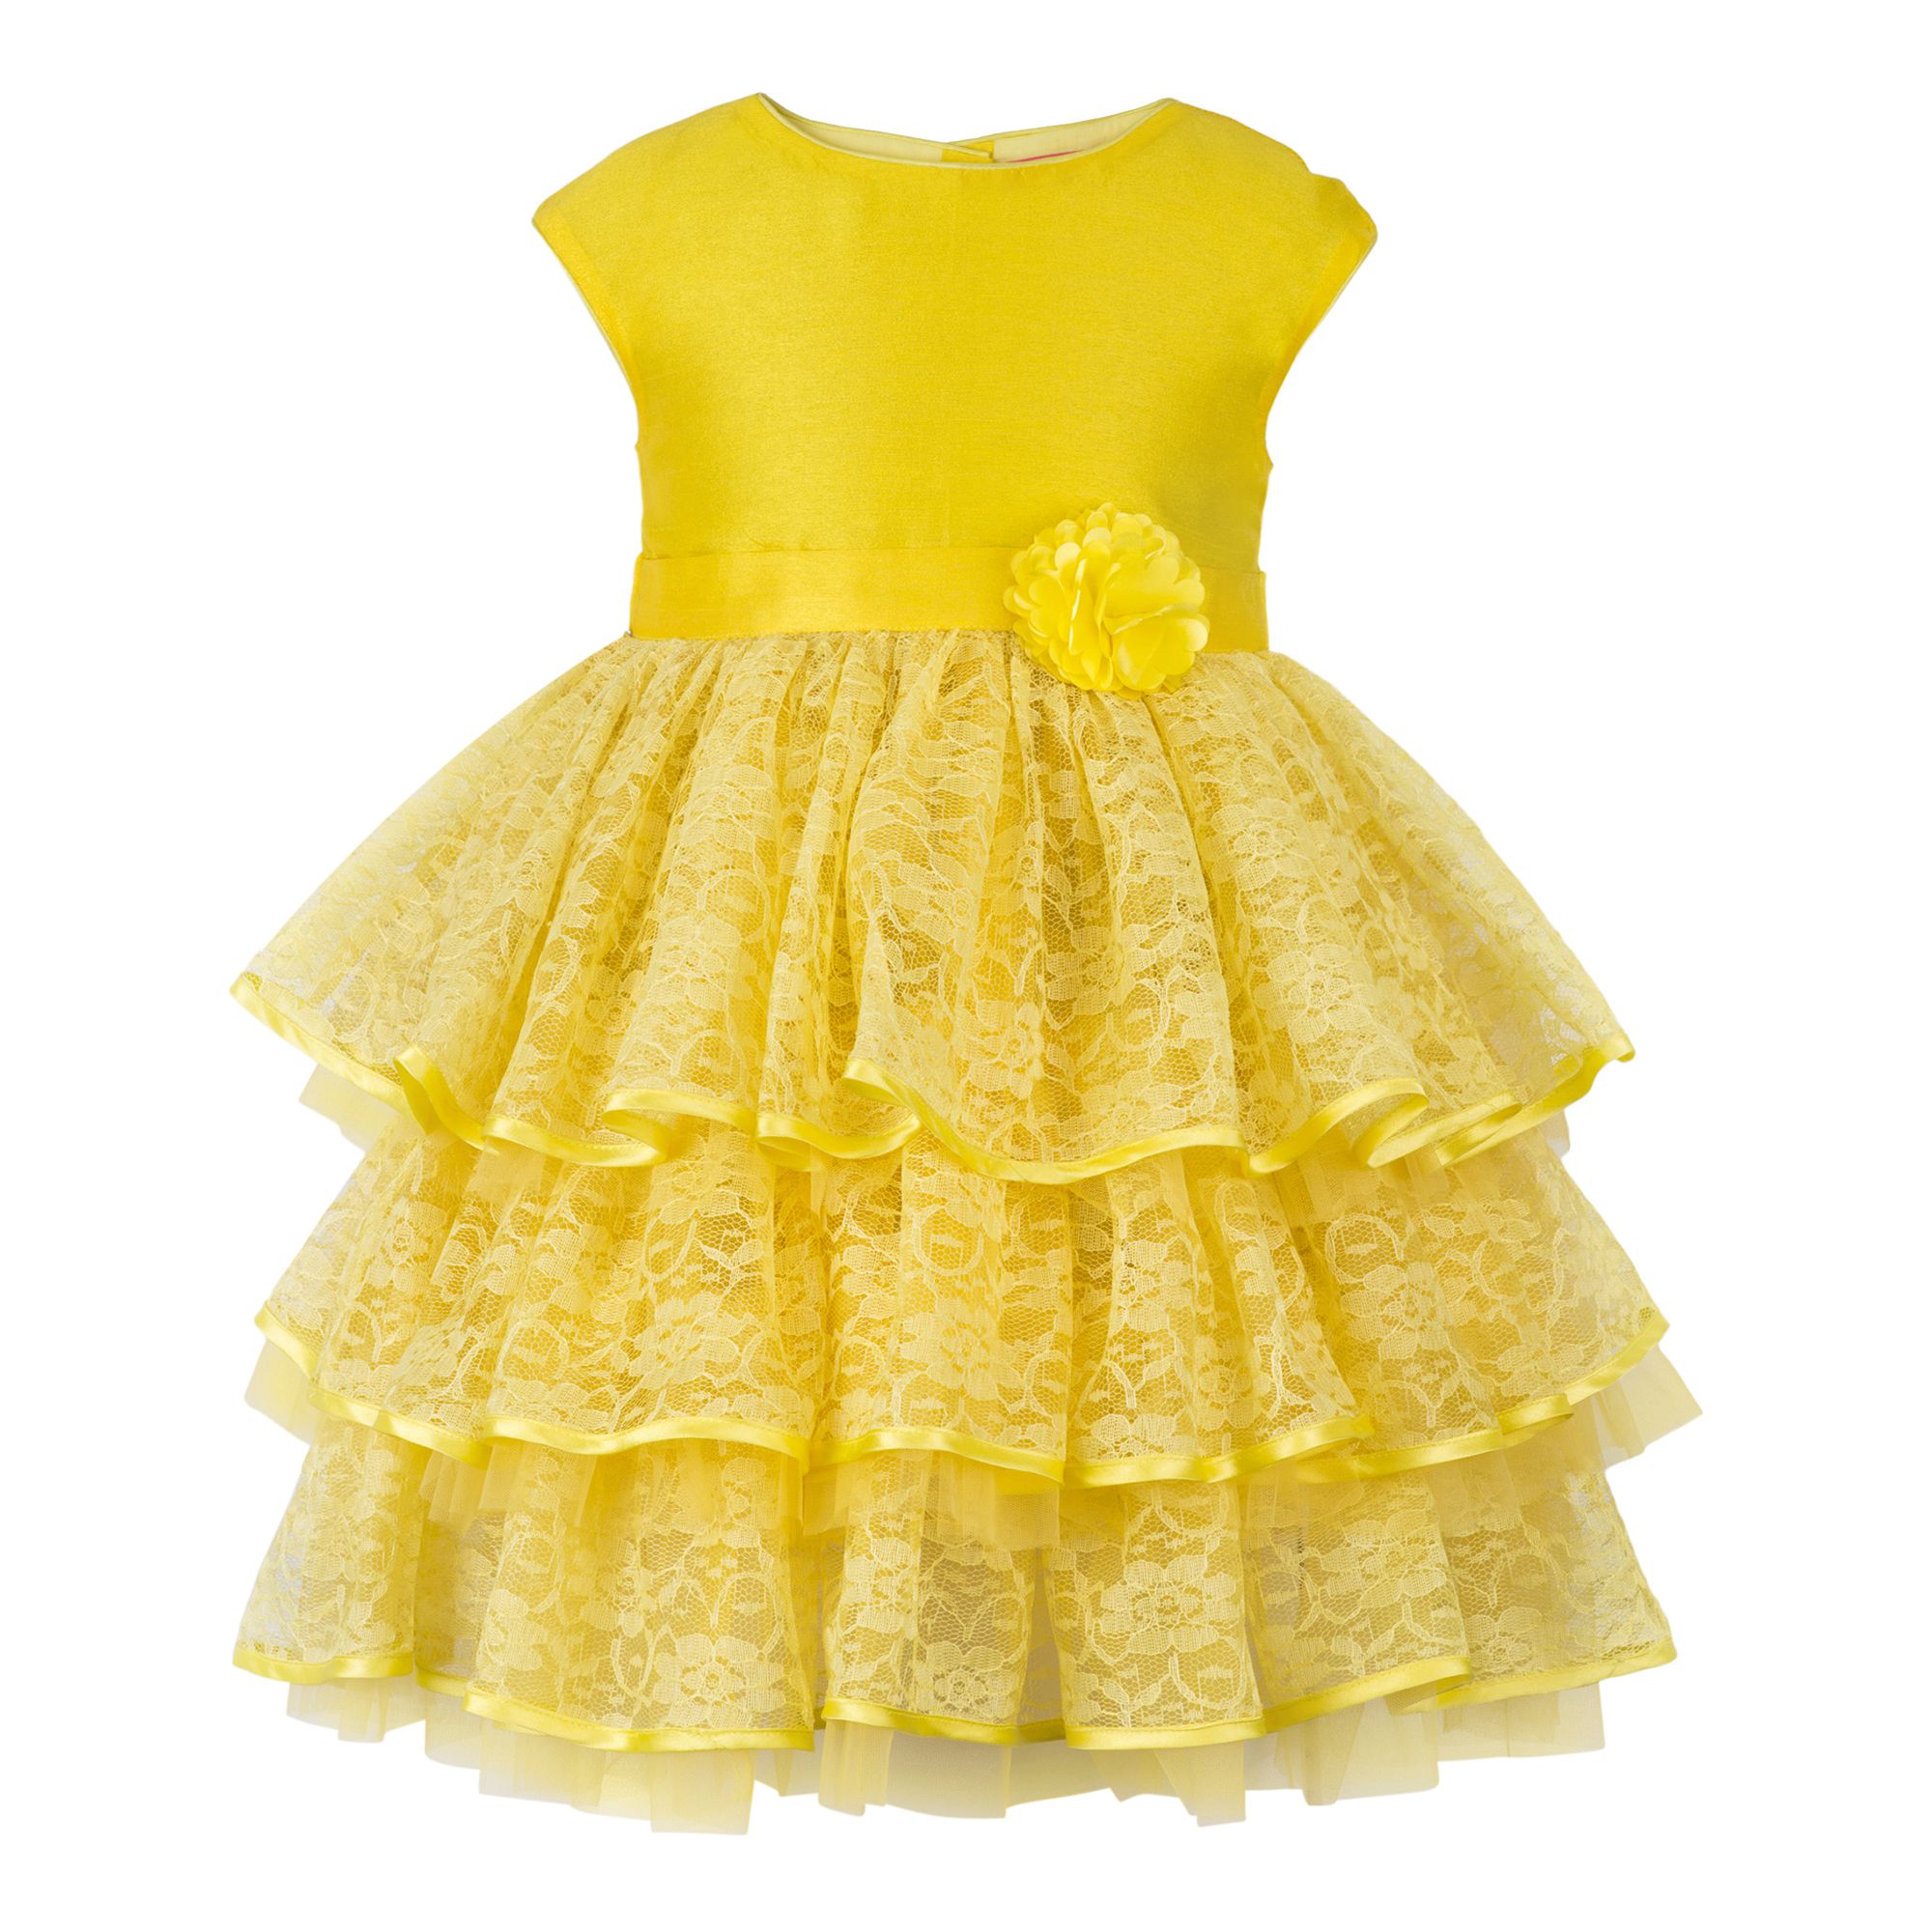 Toy Balloon Kids Yellow Lace layered Girls Party Dress - Buy Toy ...